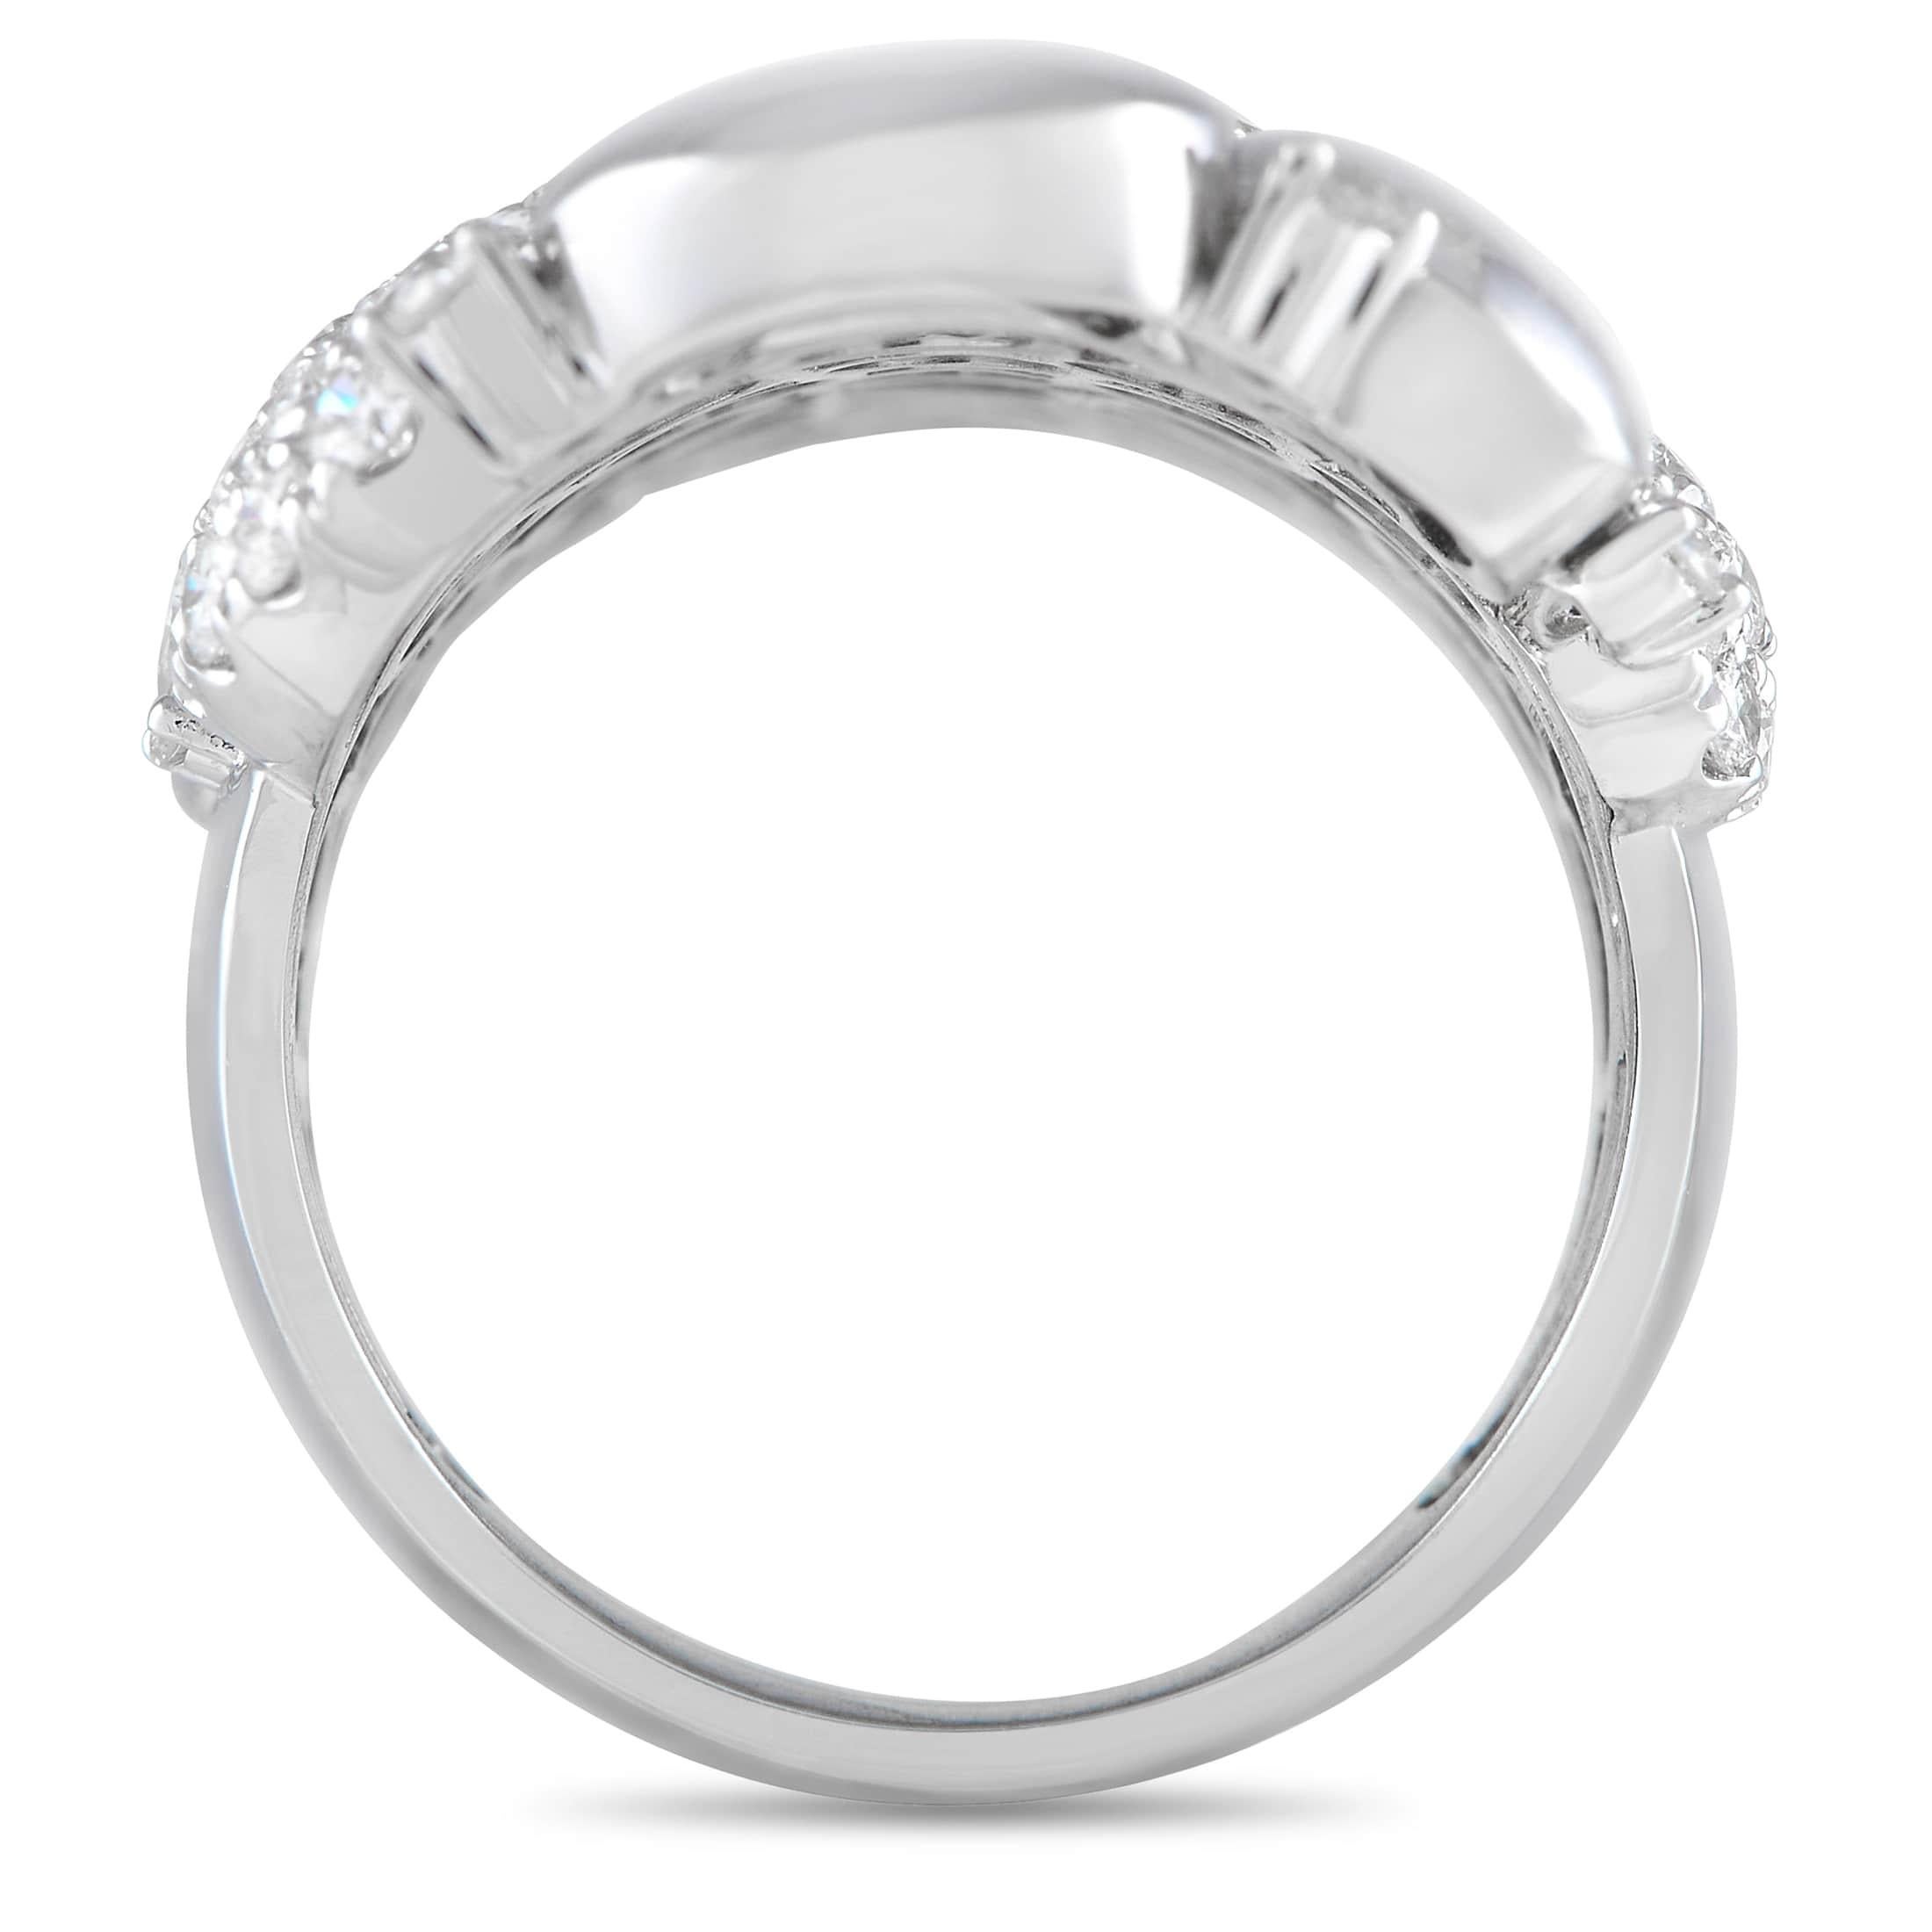 Shimmering 18K White Gold accents and inset diamonds totaling 2.50 carats pair together beautifully on this uniquely elegant ring. This bold, dynamic design features an 8mm wide band and a 3mm top height, meaning it will feel comfortable on the hand